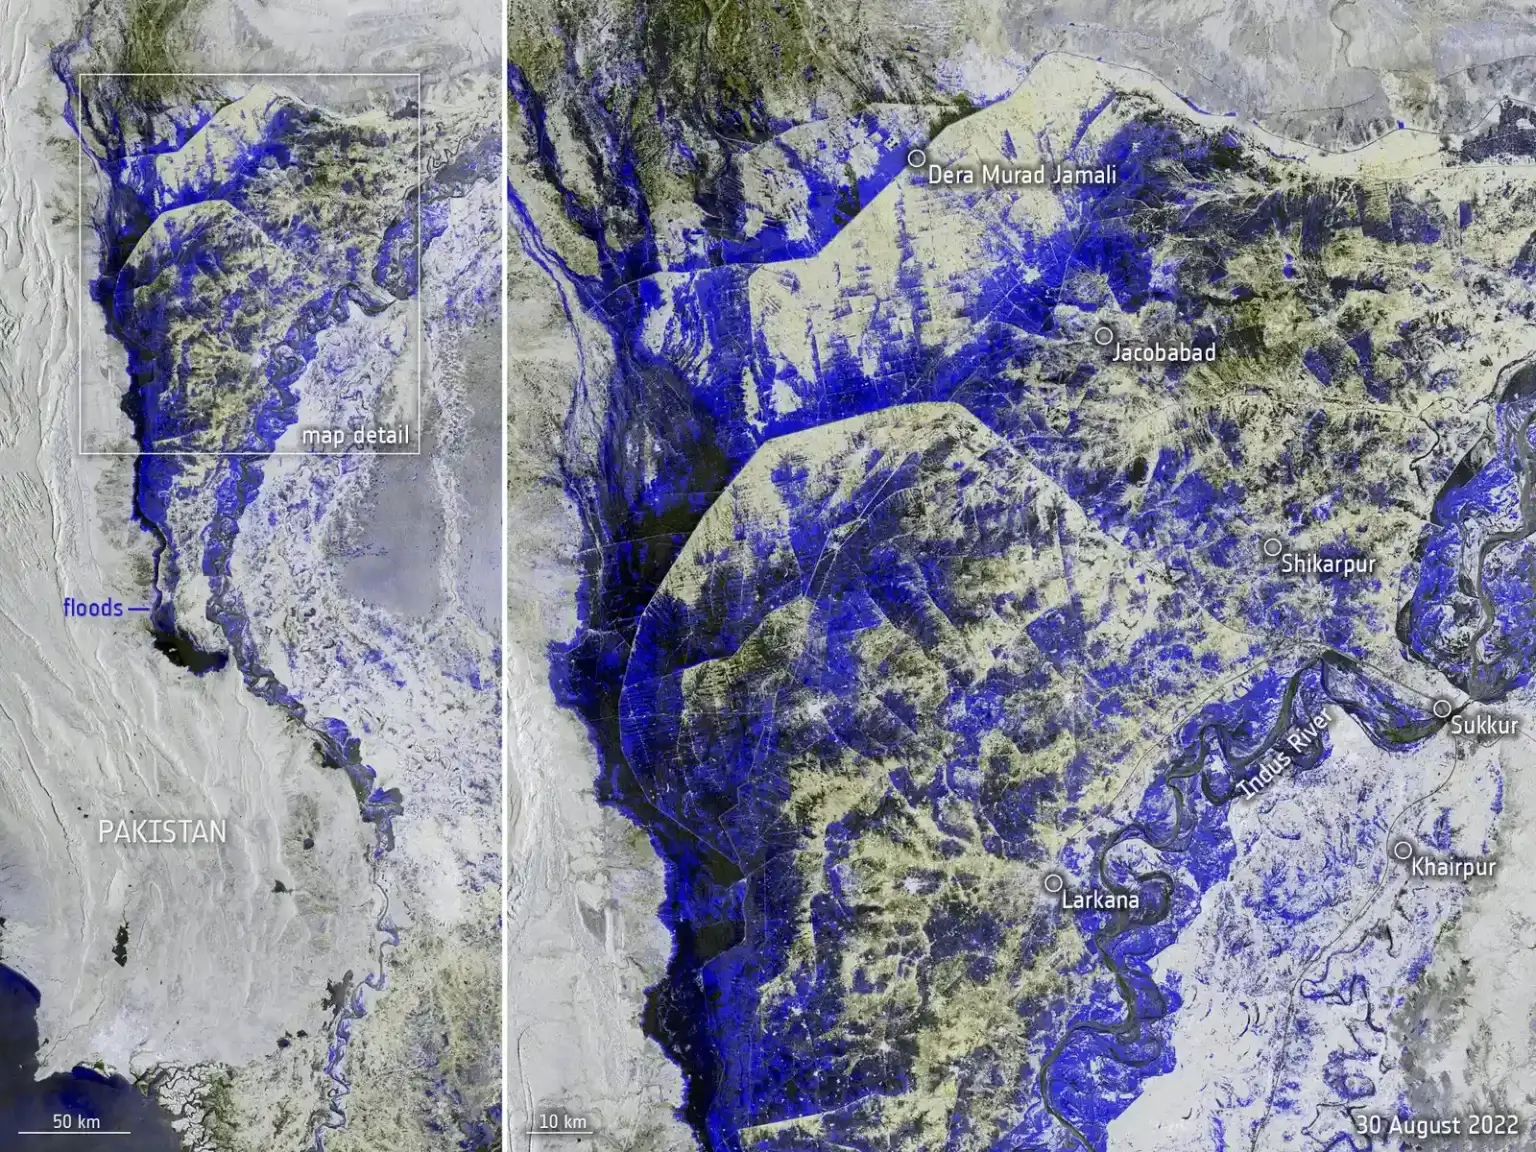 “A Monsoon On Steroids”: Pakistan Flooding Is So Devastating It Can Be Seen From Space, Third of Country Now Underwater